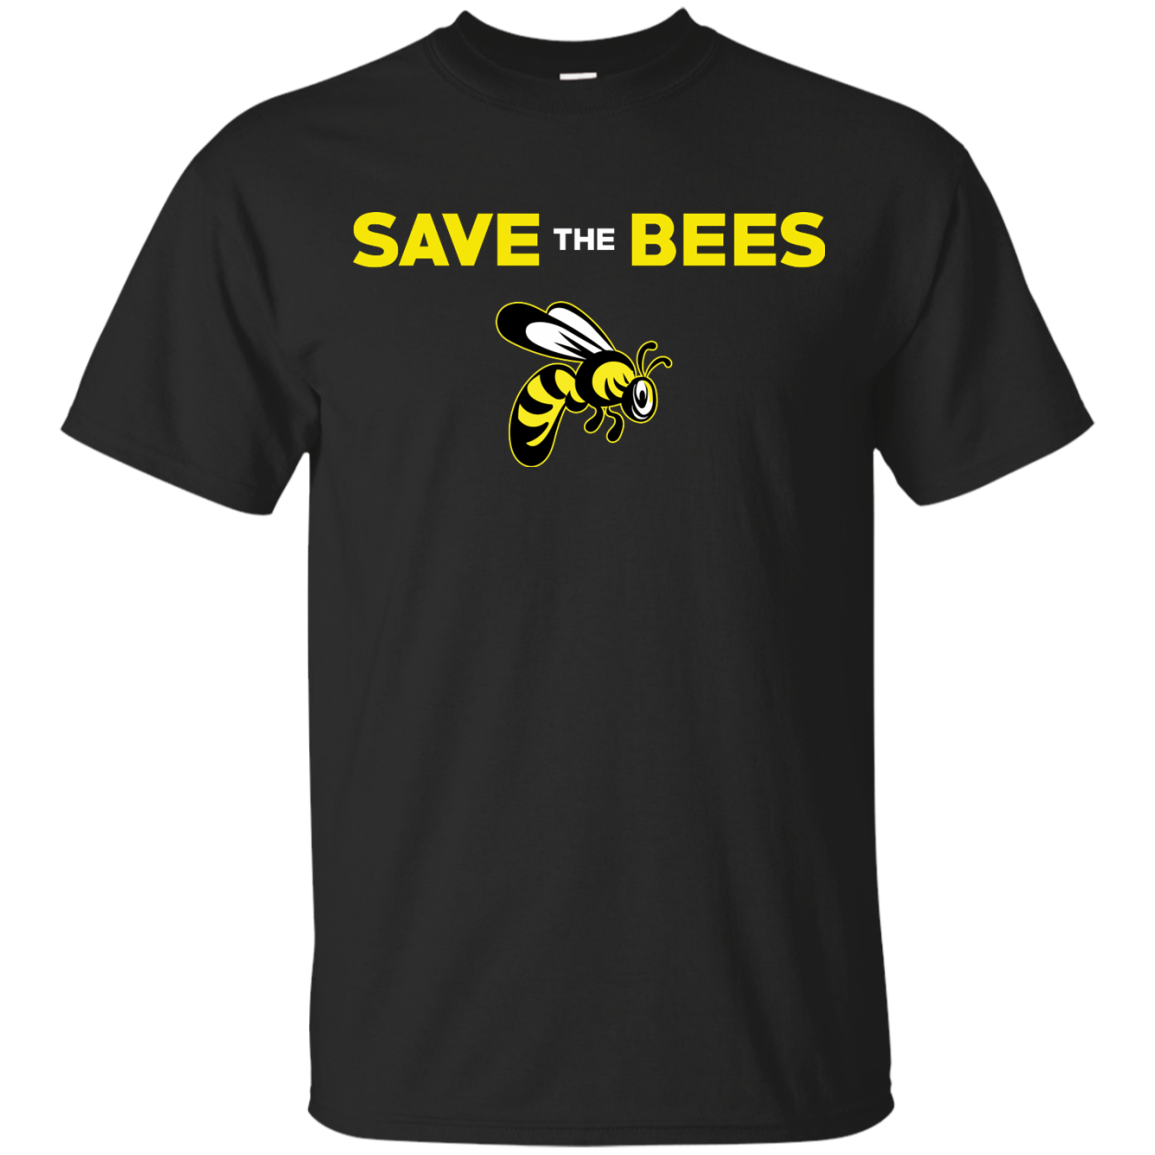 Save The Bees T-shirt